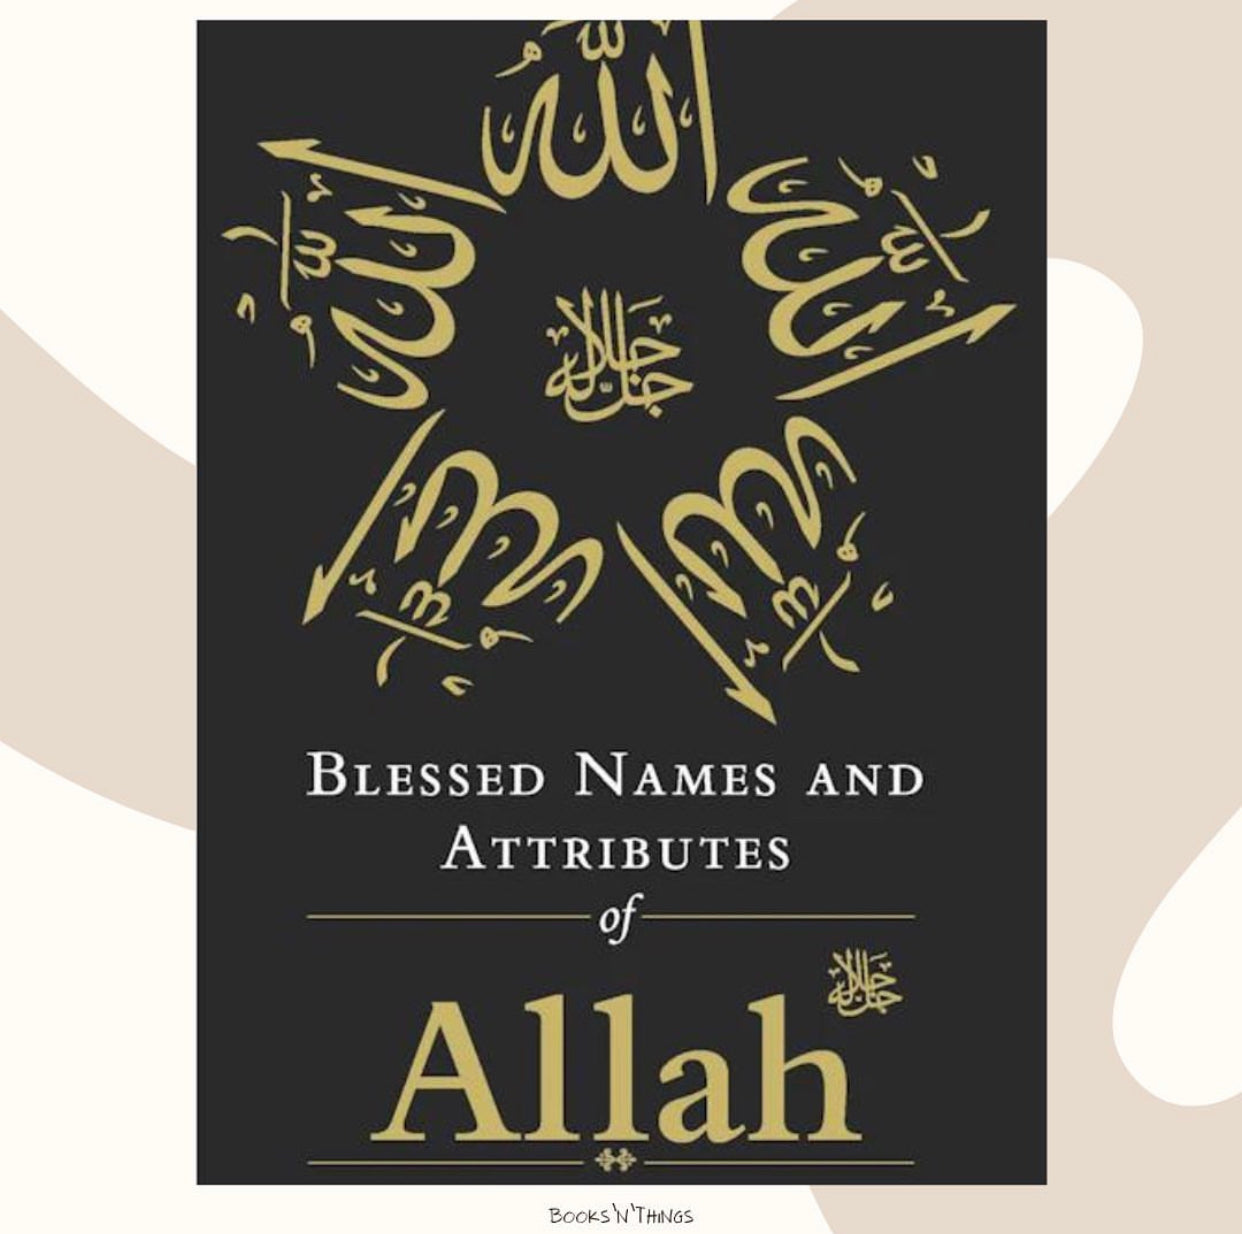 Blessed Names and Attributes of Allah